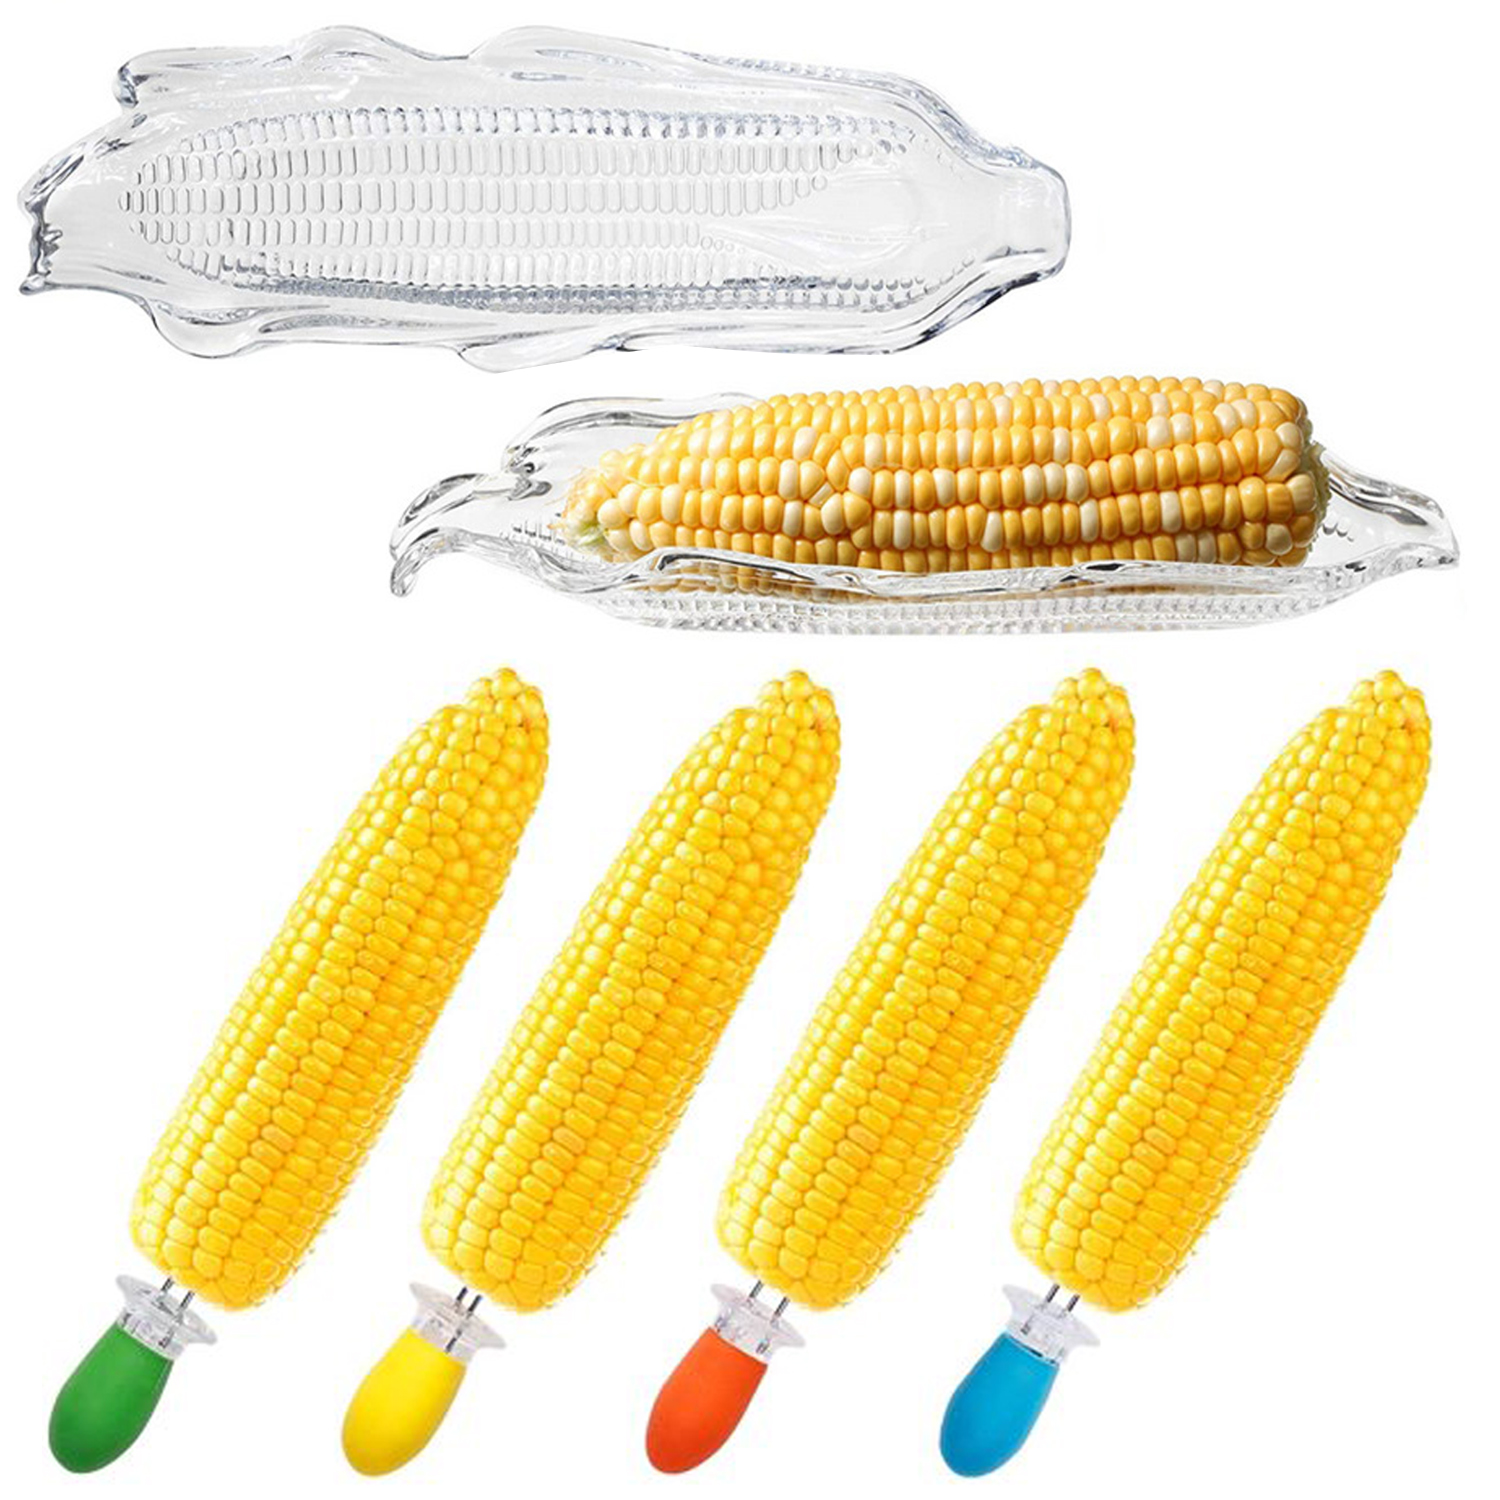 2 Pcs Plastic Corn Trays, 2 Pcs BBQ Corn Twin Prong Sweetcorn Holders For Corn Dishes and Buttering Kits, Pack of 4